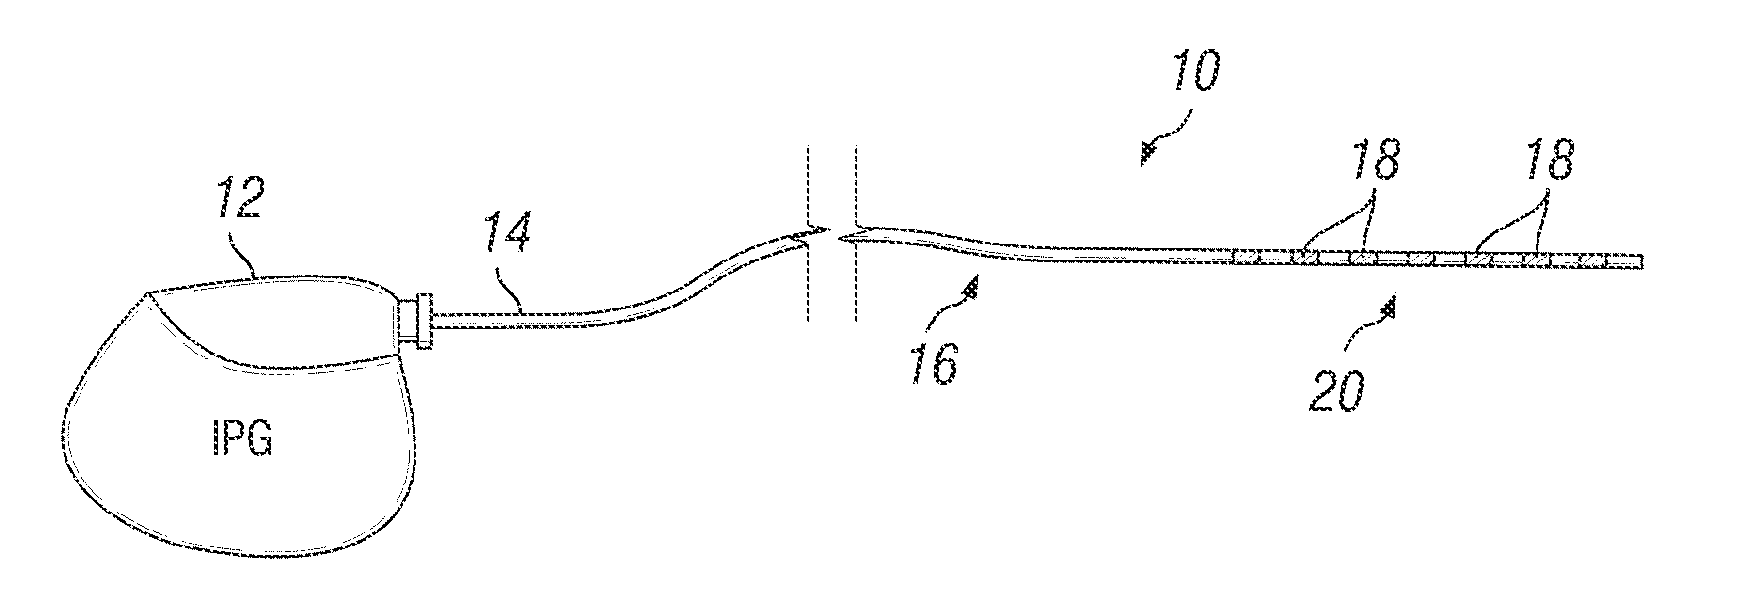 Method of using spinal cord stimulation to treat neurological disorders or conditions